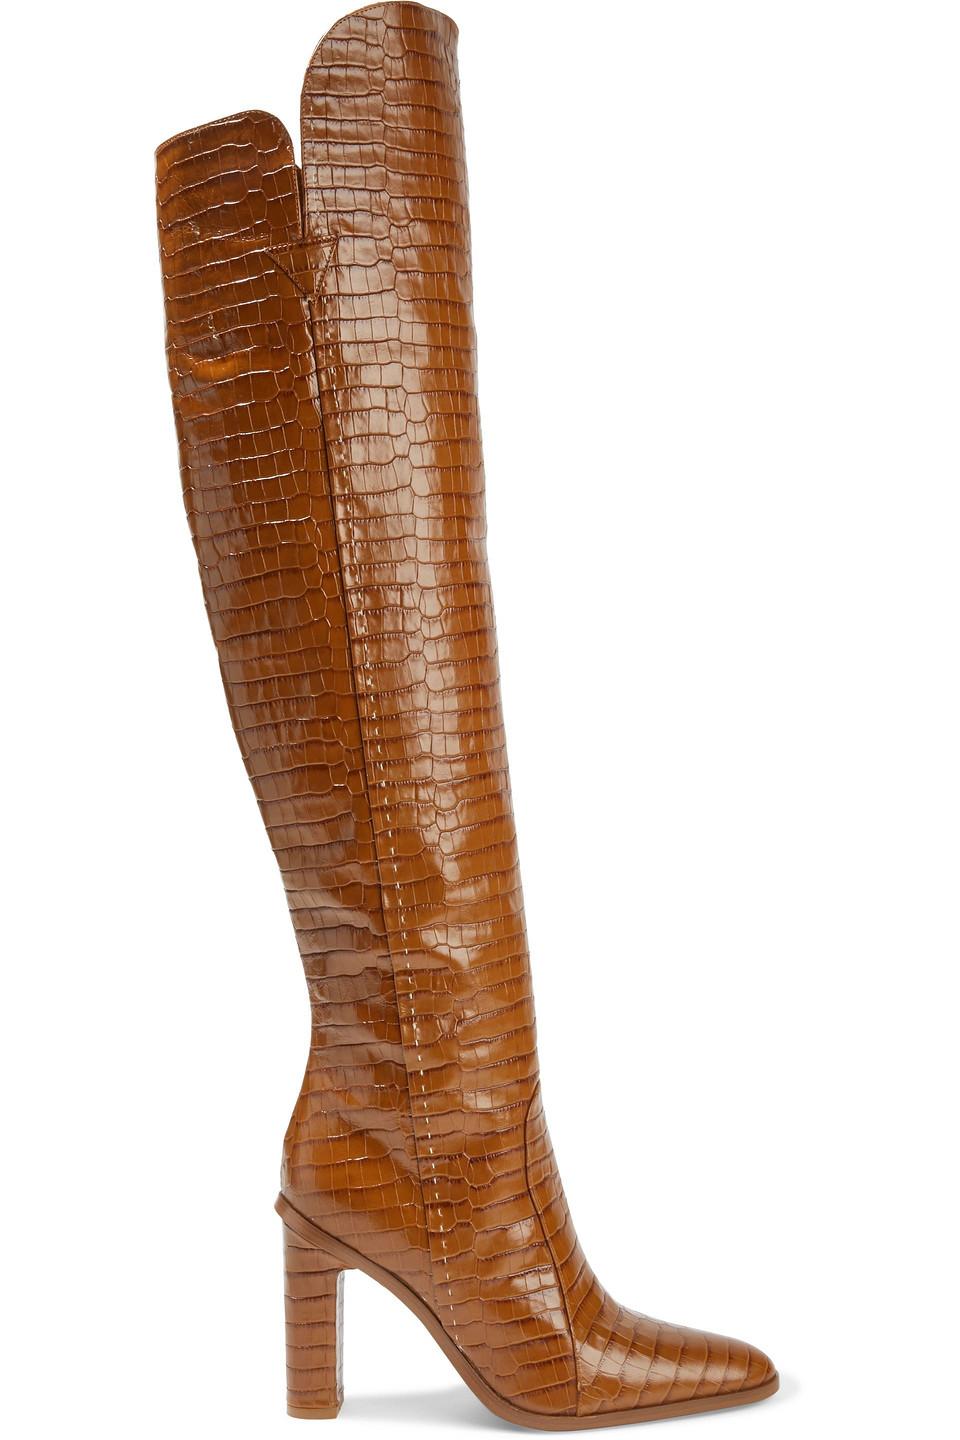 Max Mara Beboot Glossed Croc-effect Leather Over-the-knee Boots in Brown |  Lyst